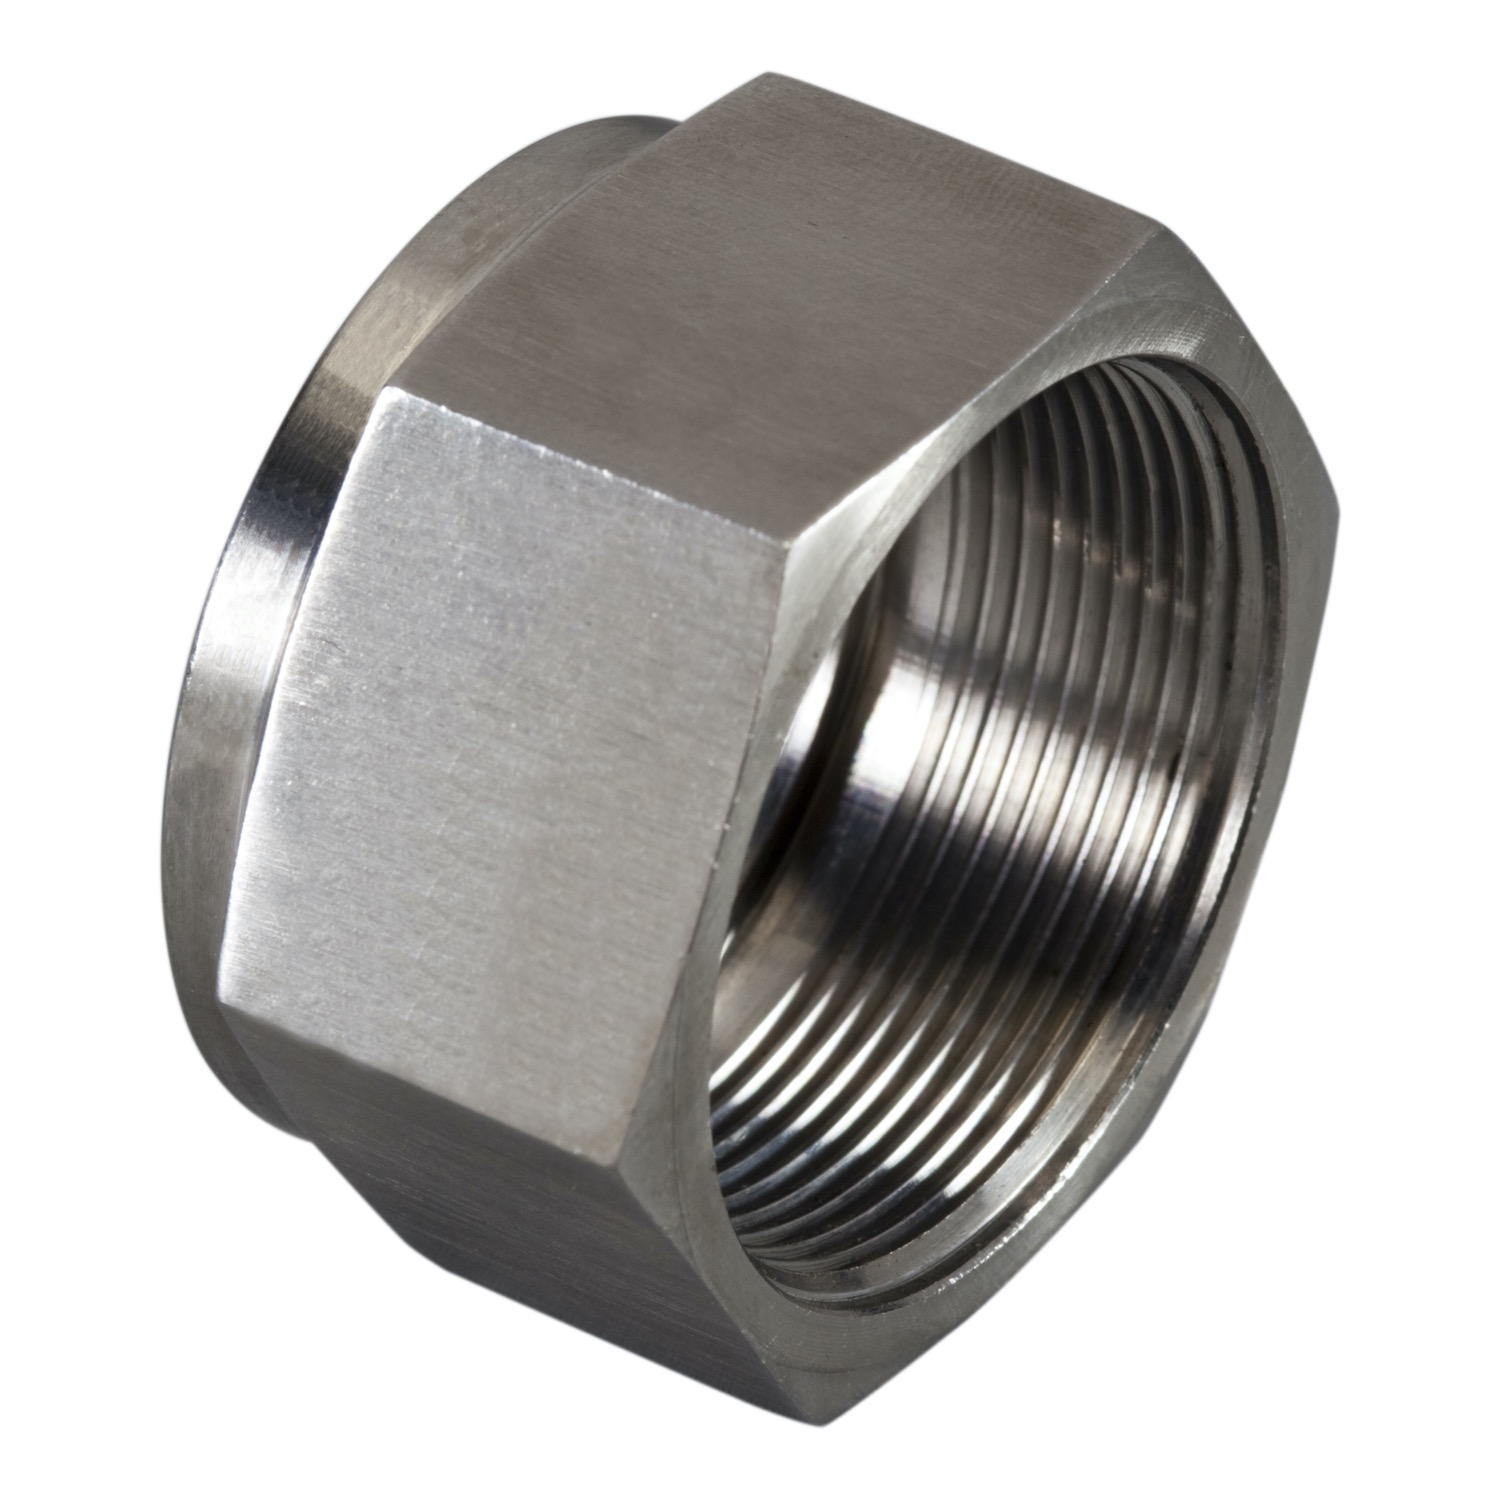 Nut - Compression Fittings, N0318 Series